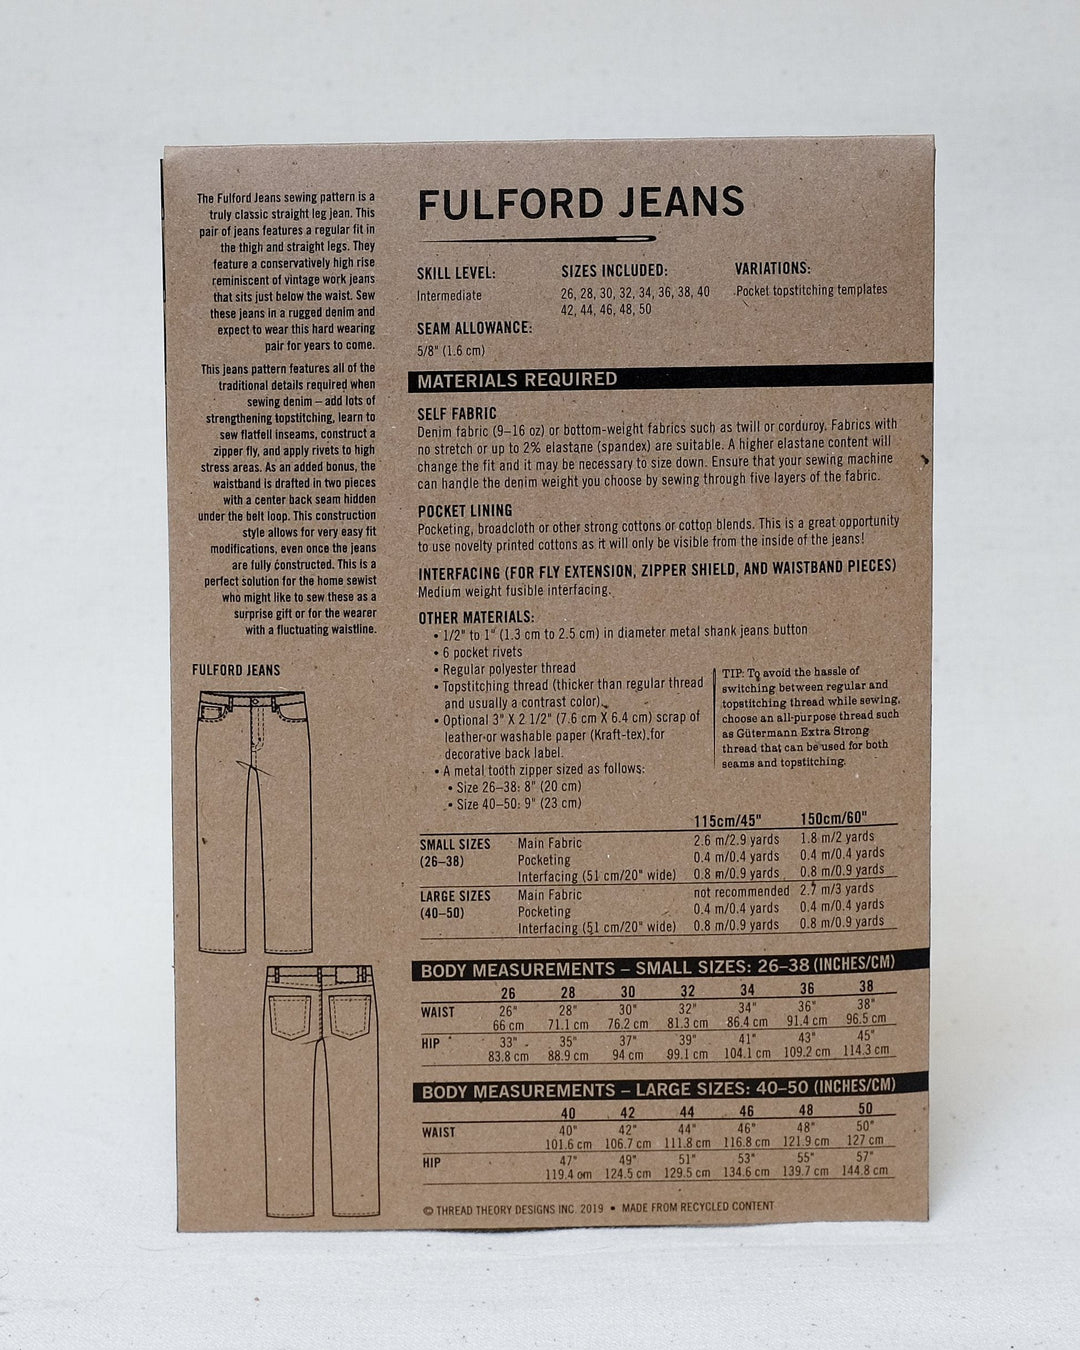 Fulford Jeans - Thread Theory